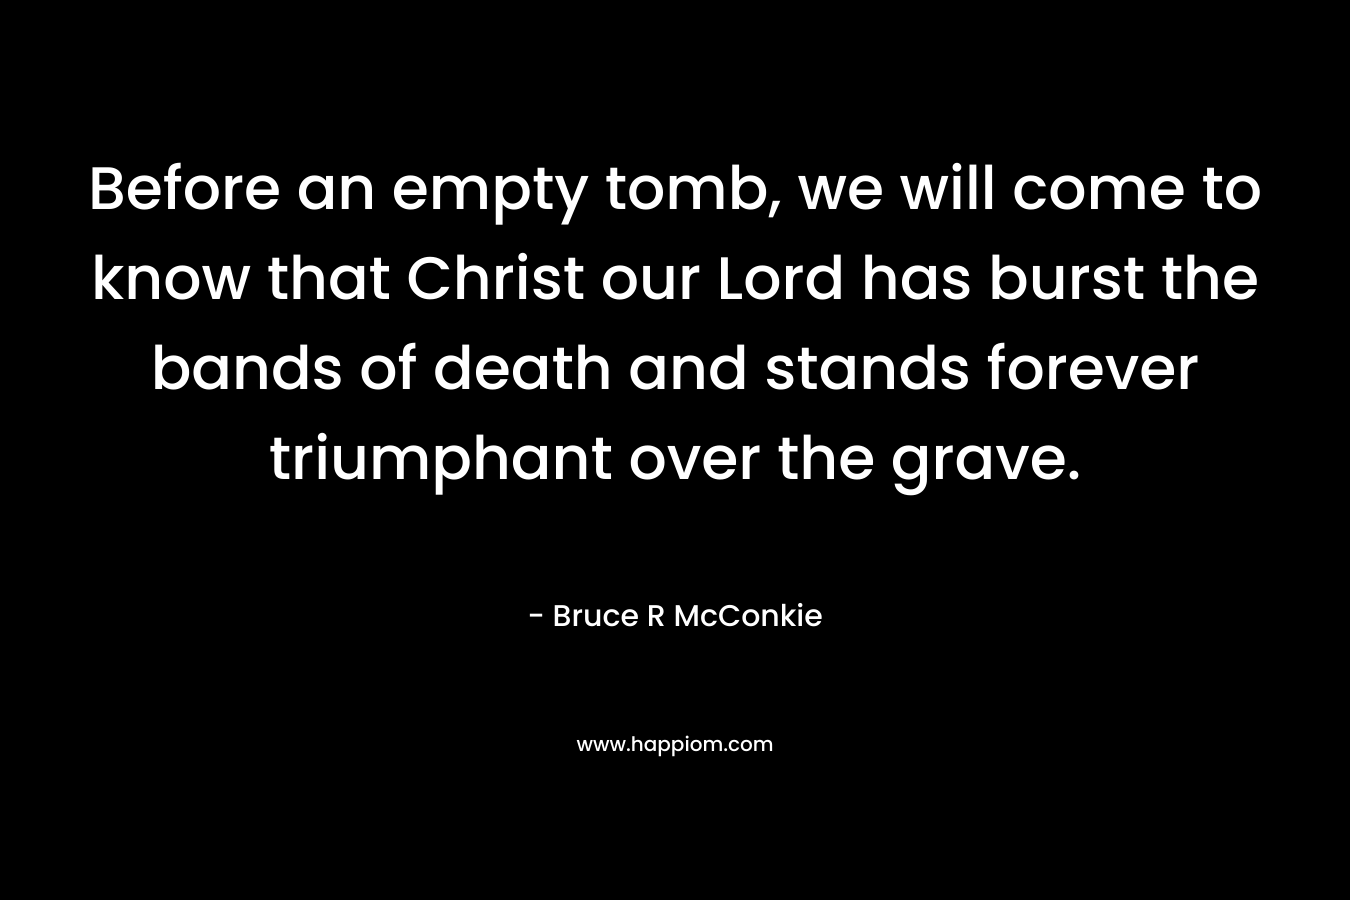 Before an empty tomb, we will come to know that Christ our Lord has burst the bands of death and stands forever triumphant over the grave. – Bruce R McConkie